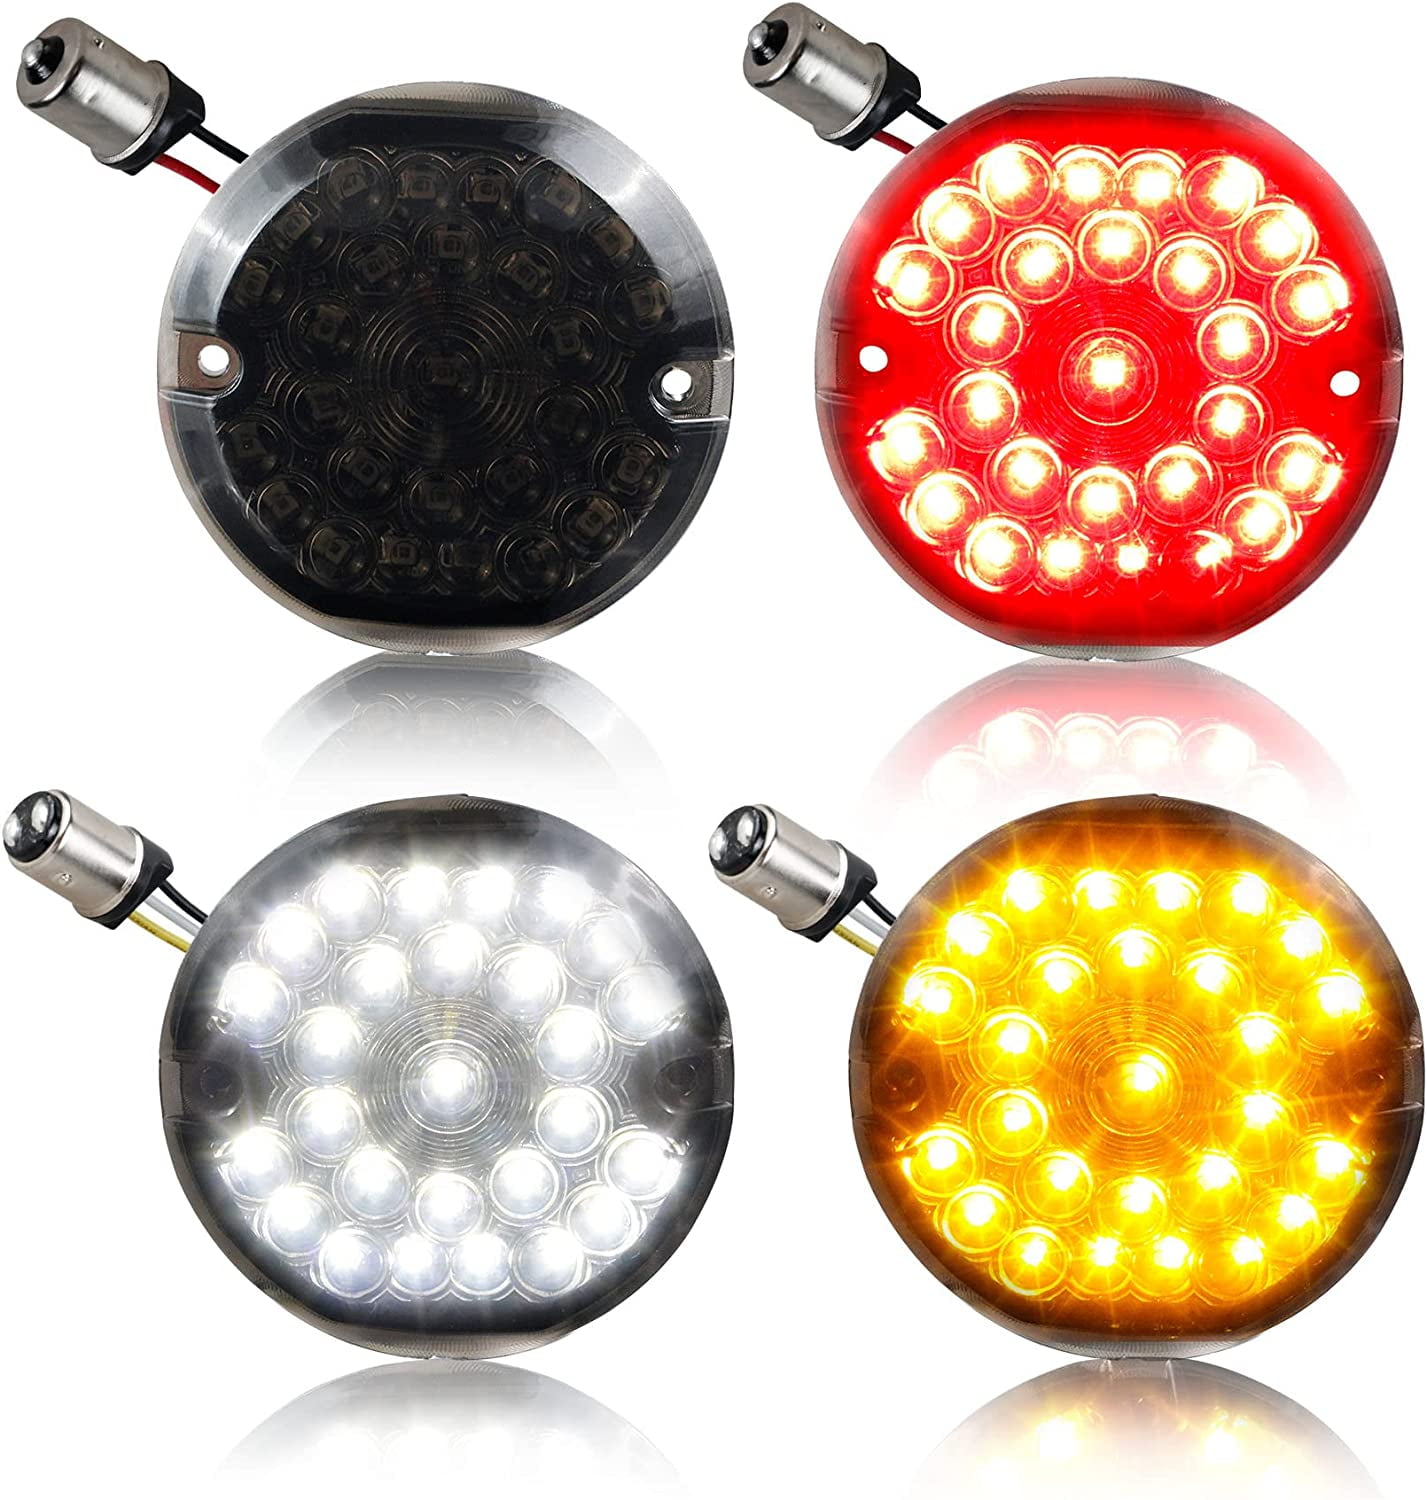 NTHREEAUTO 3 1/4 inch Front LED Turn Signal Lights with Smoked Lens Cover Compatible with Harley Touring Electra Glides Road King 